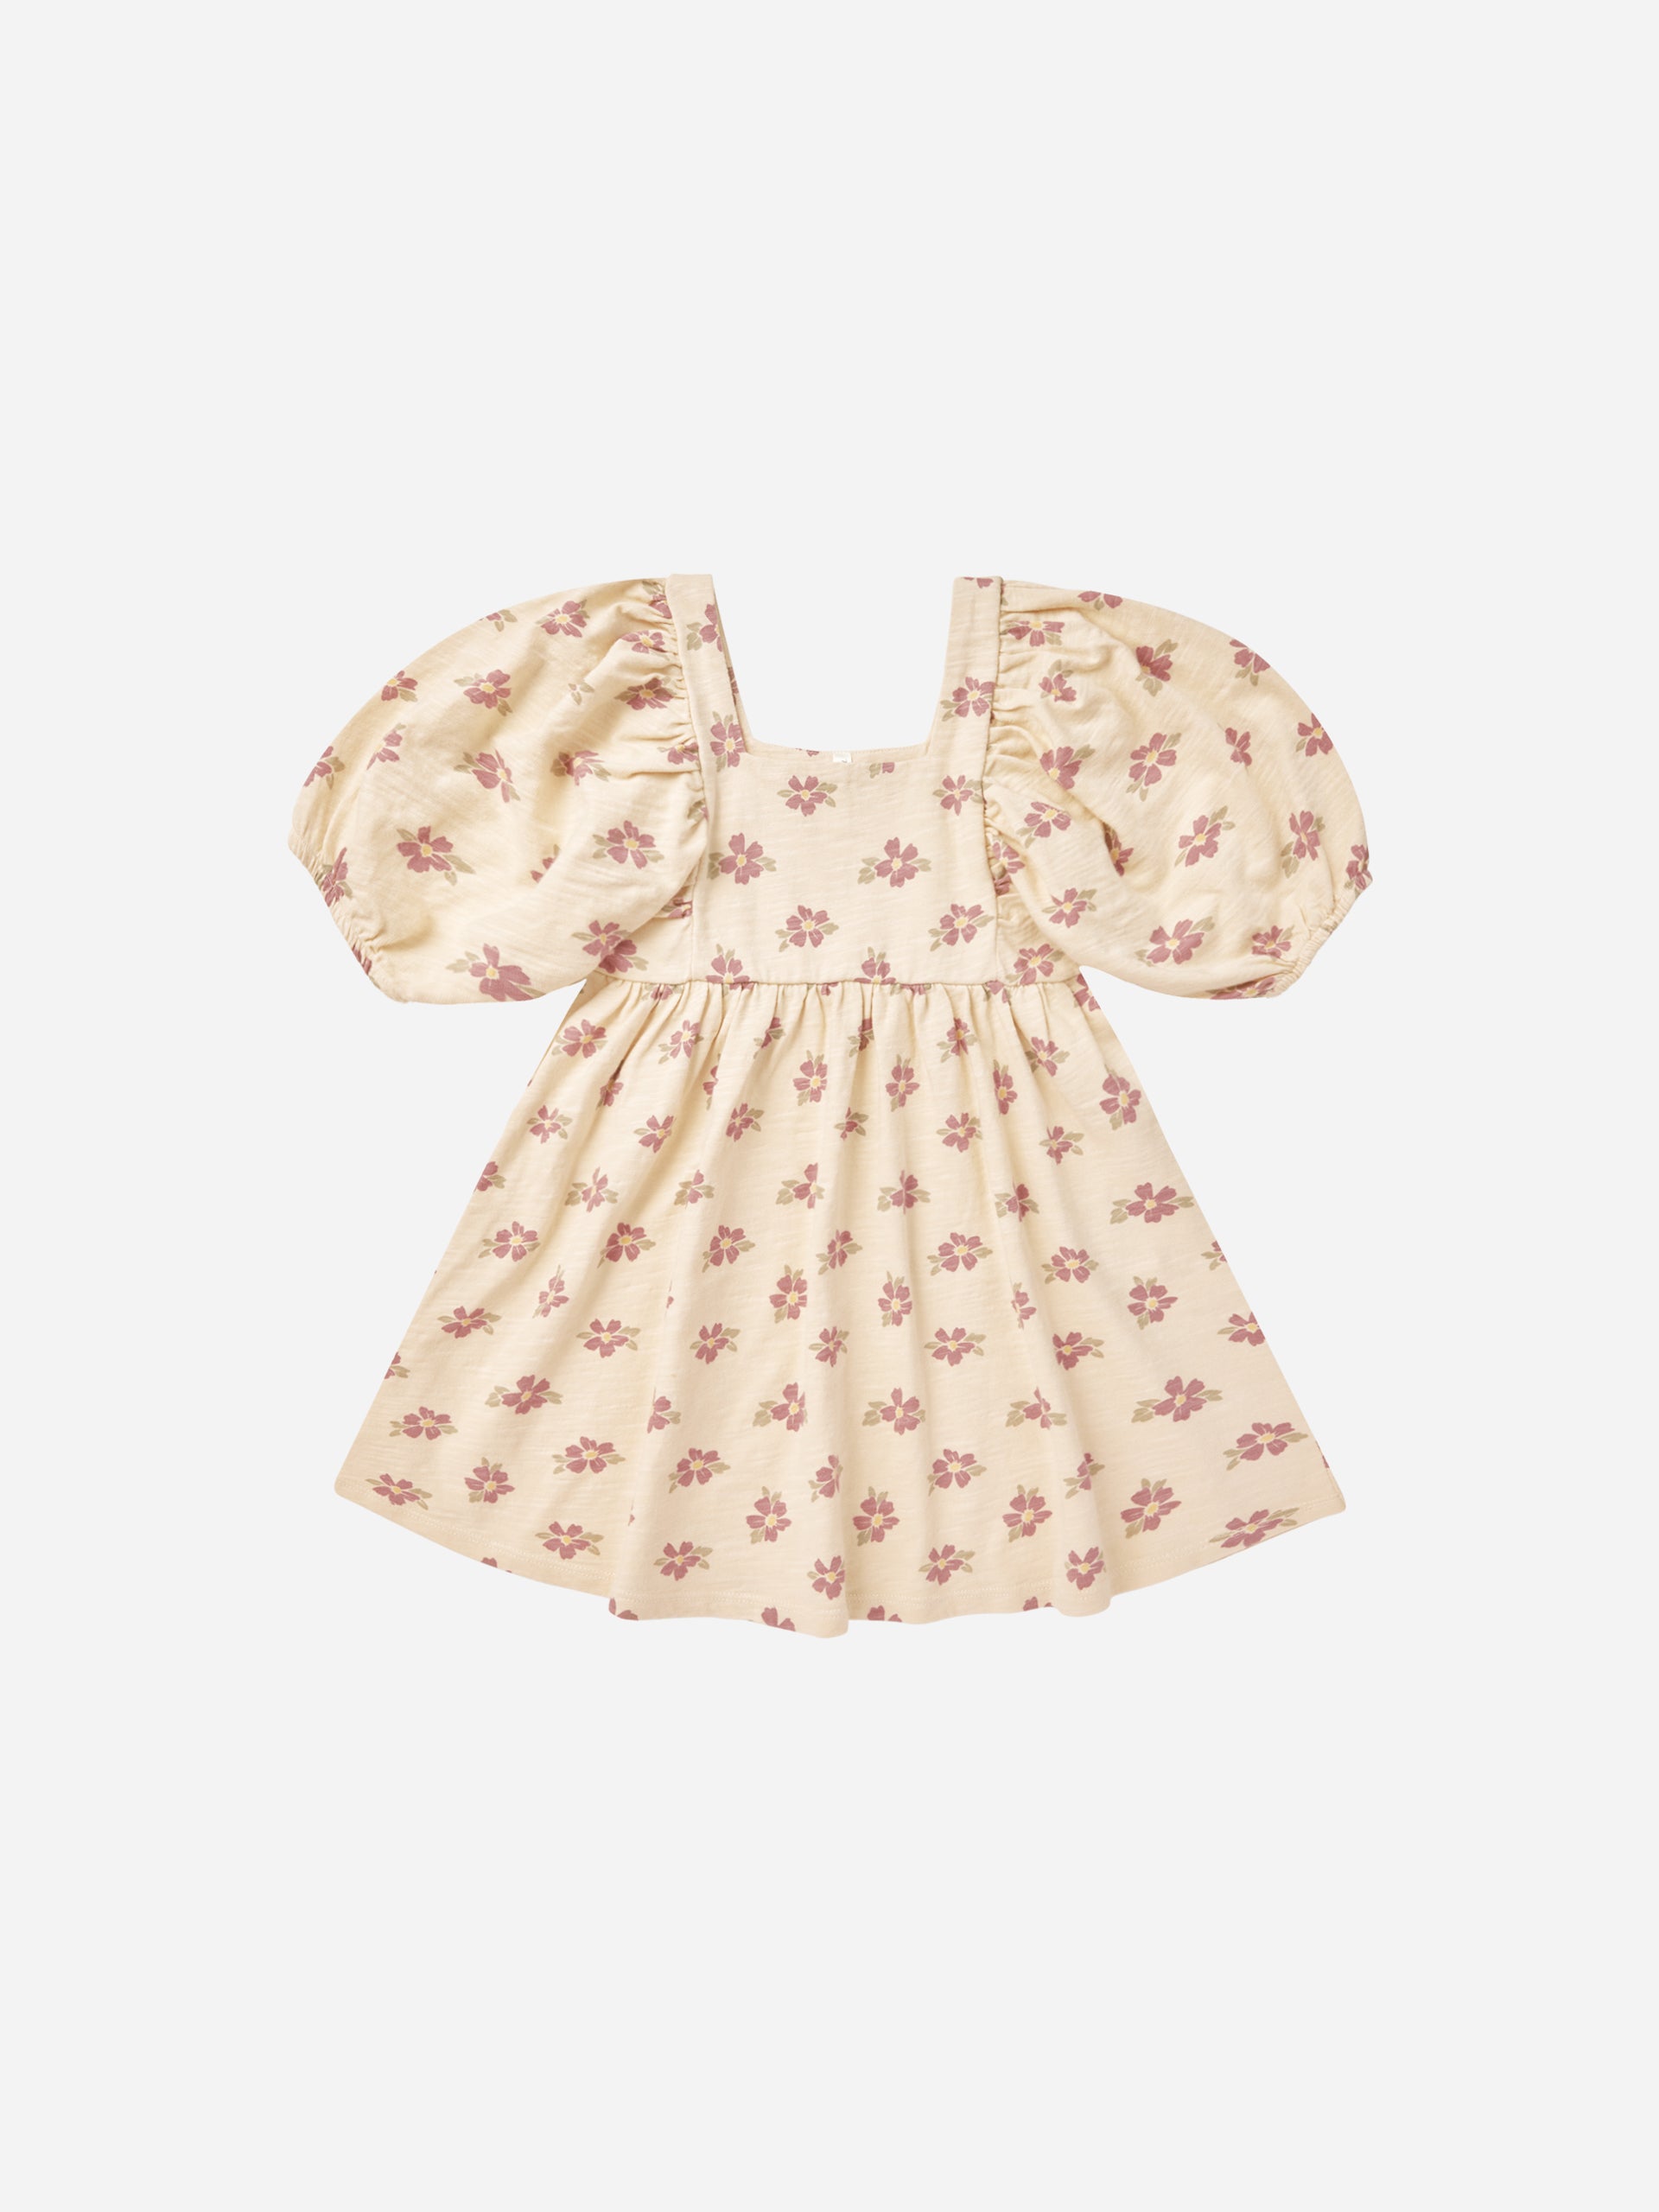 Brea Dress || Kauai - Rylee + Cru | Kids Clothes | Trendy Baby Clothes | Modern Infant Outfits |